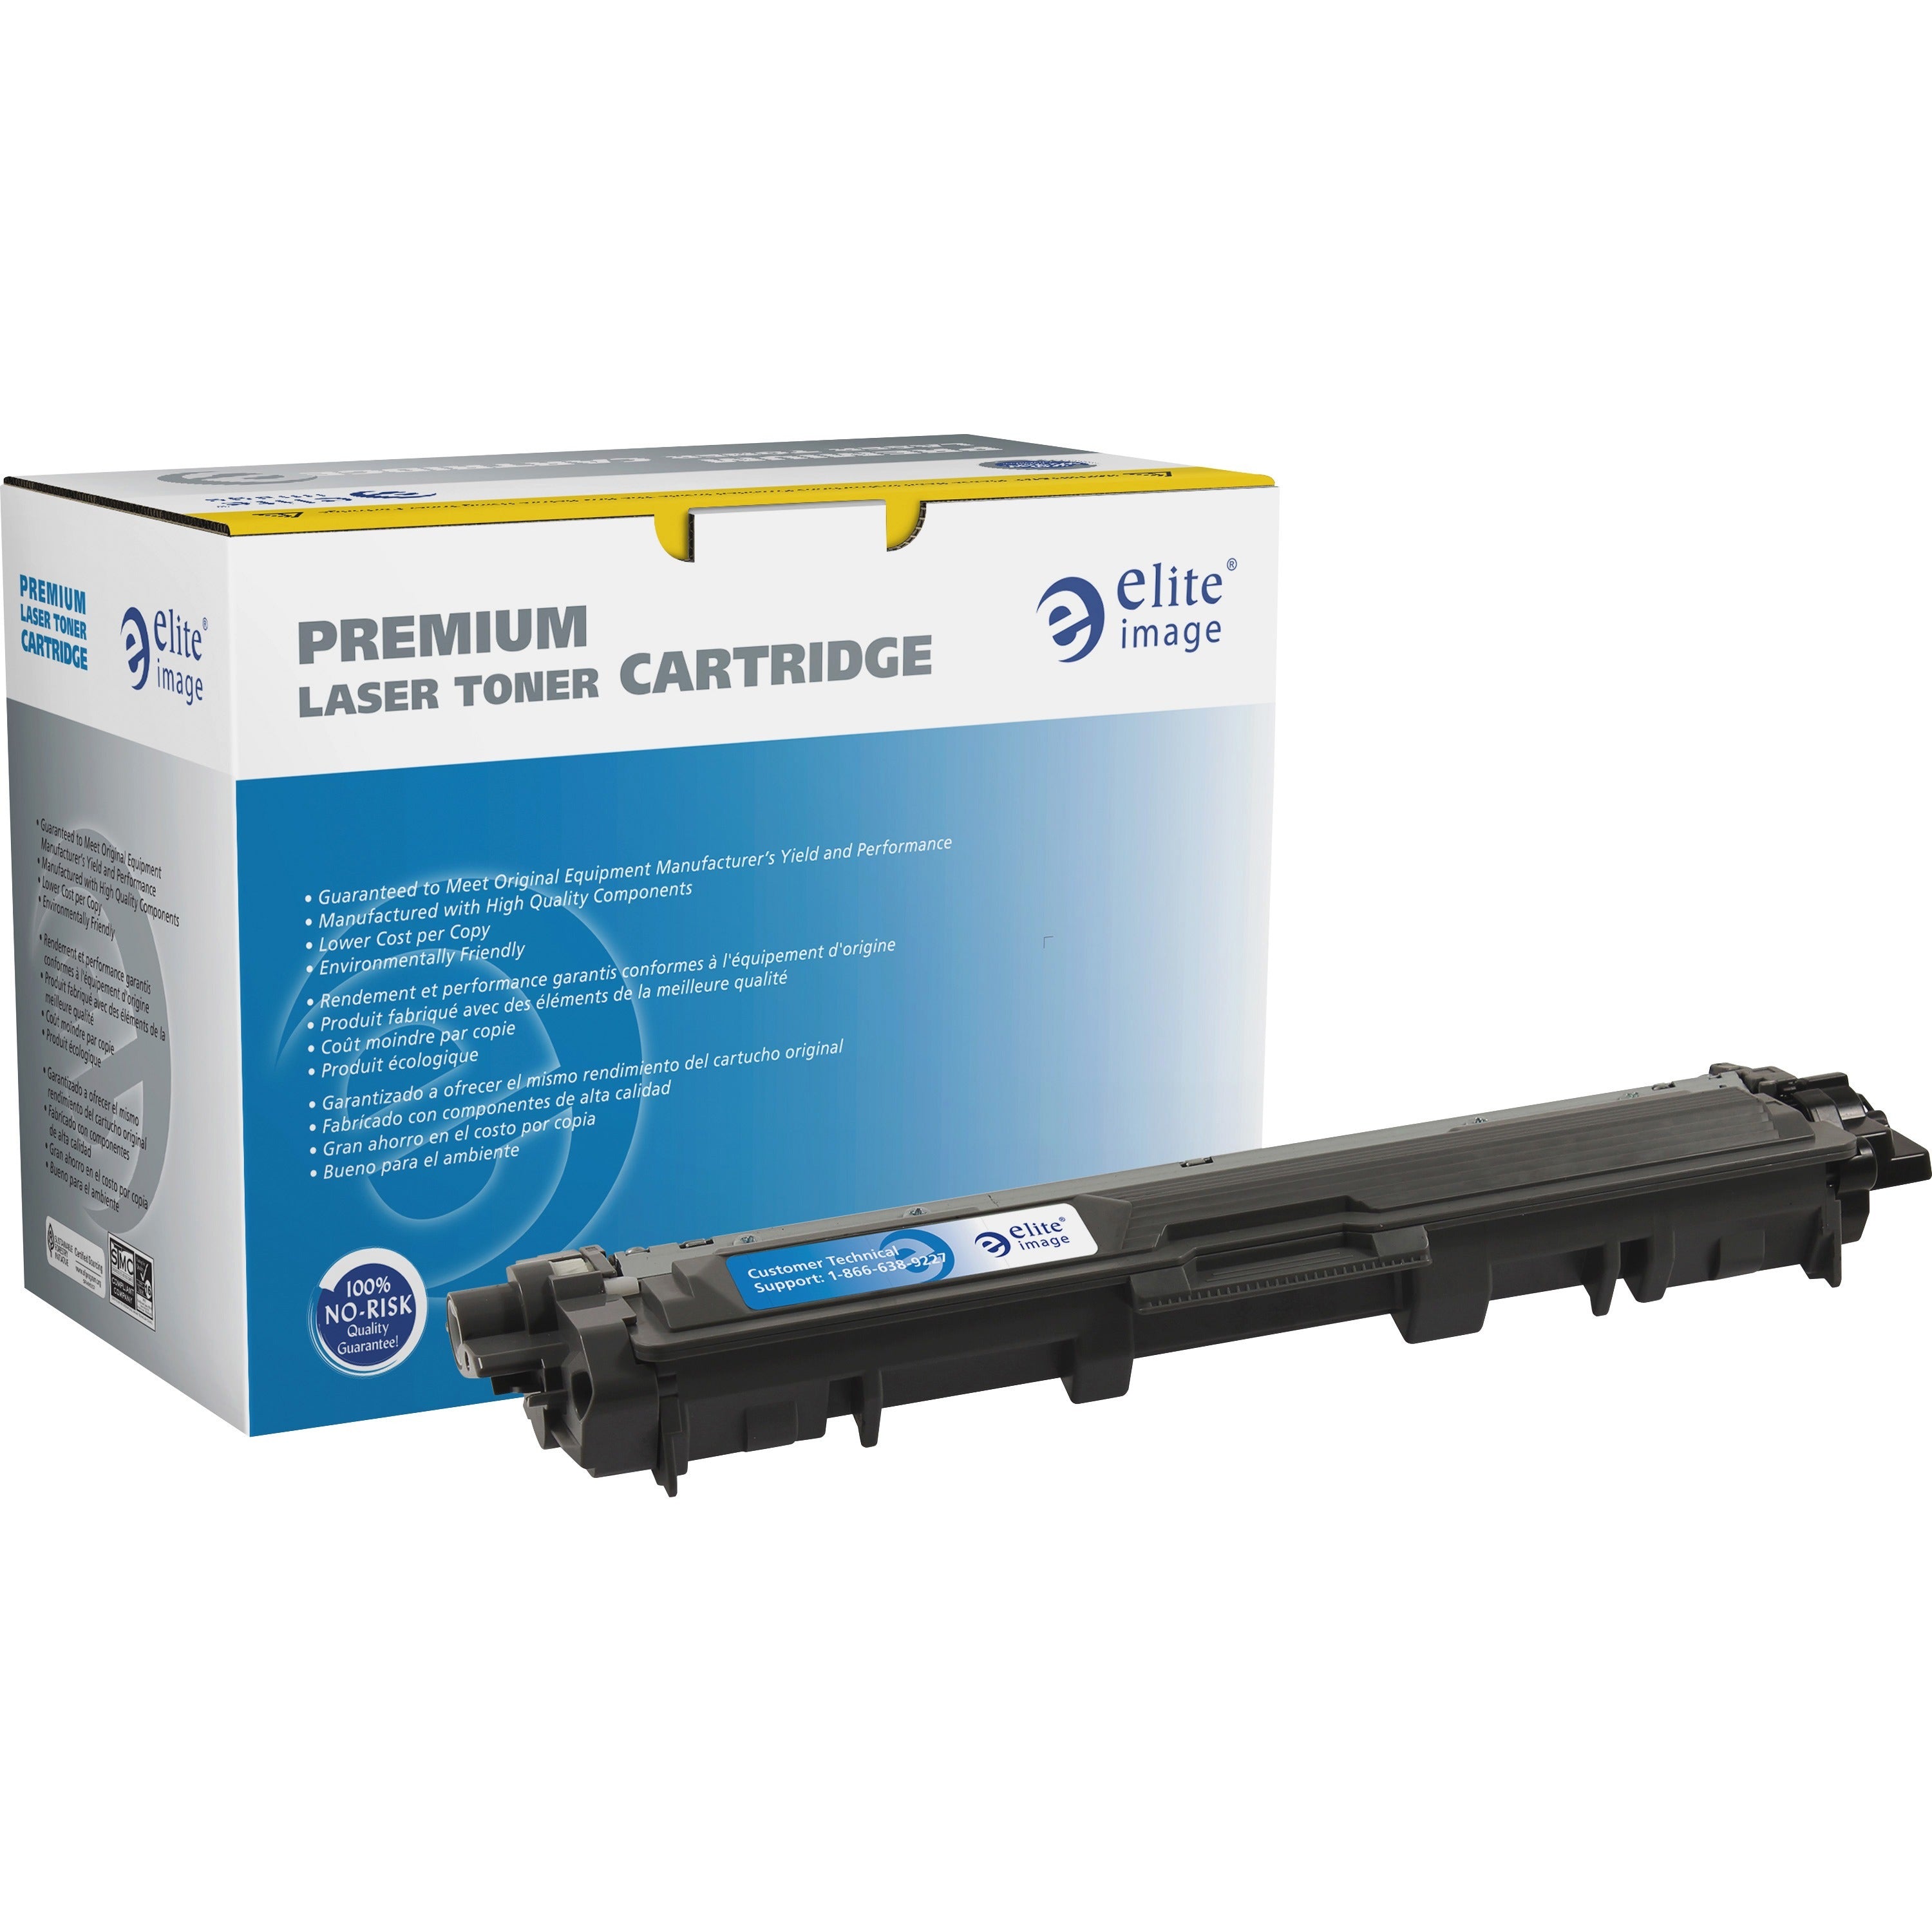 elite-image-remanufactured-laser-toner-cartridge-alternative-for-brother-tn221-yellow-1-each-1400-pages_eli76193 - 1